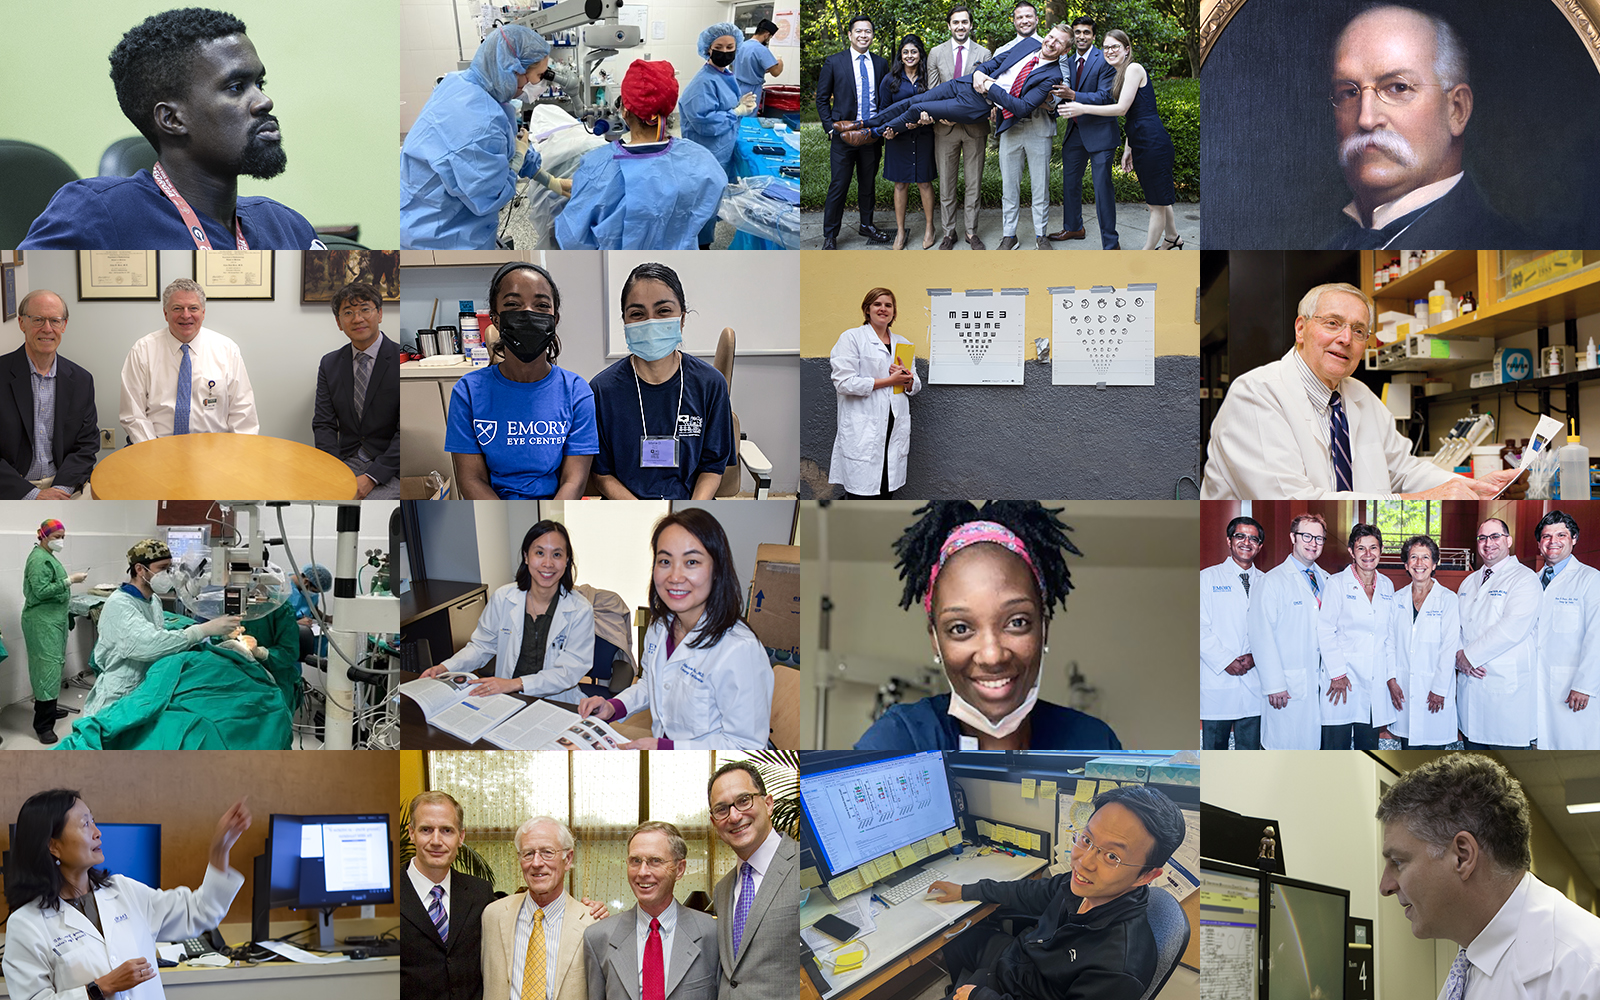 16-photo collage of researchers, students, faculty, administrators, and supporters of Emory Eye Center